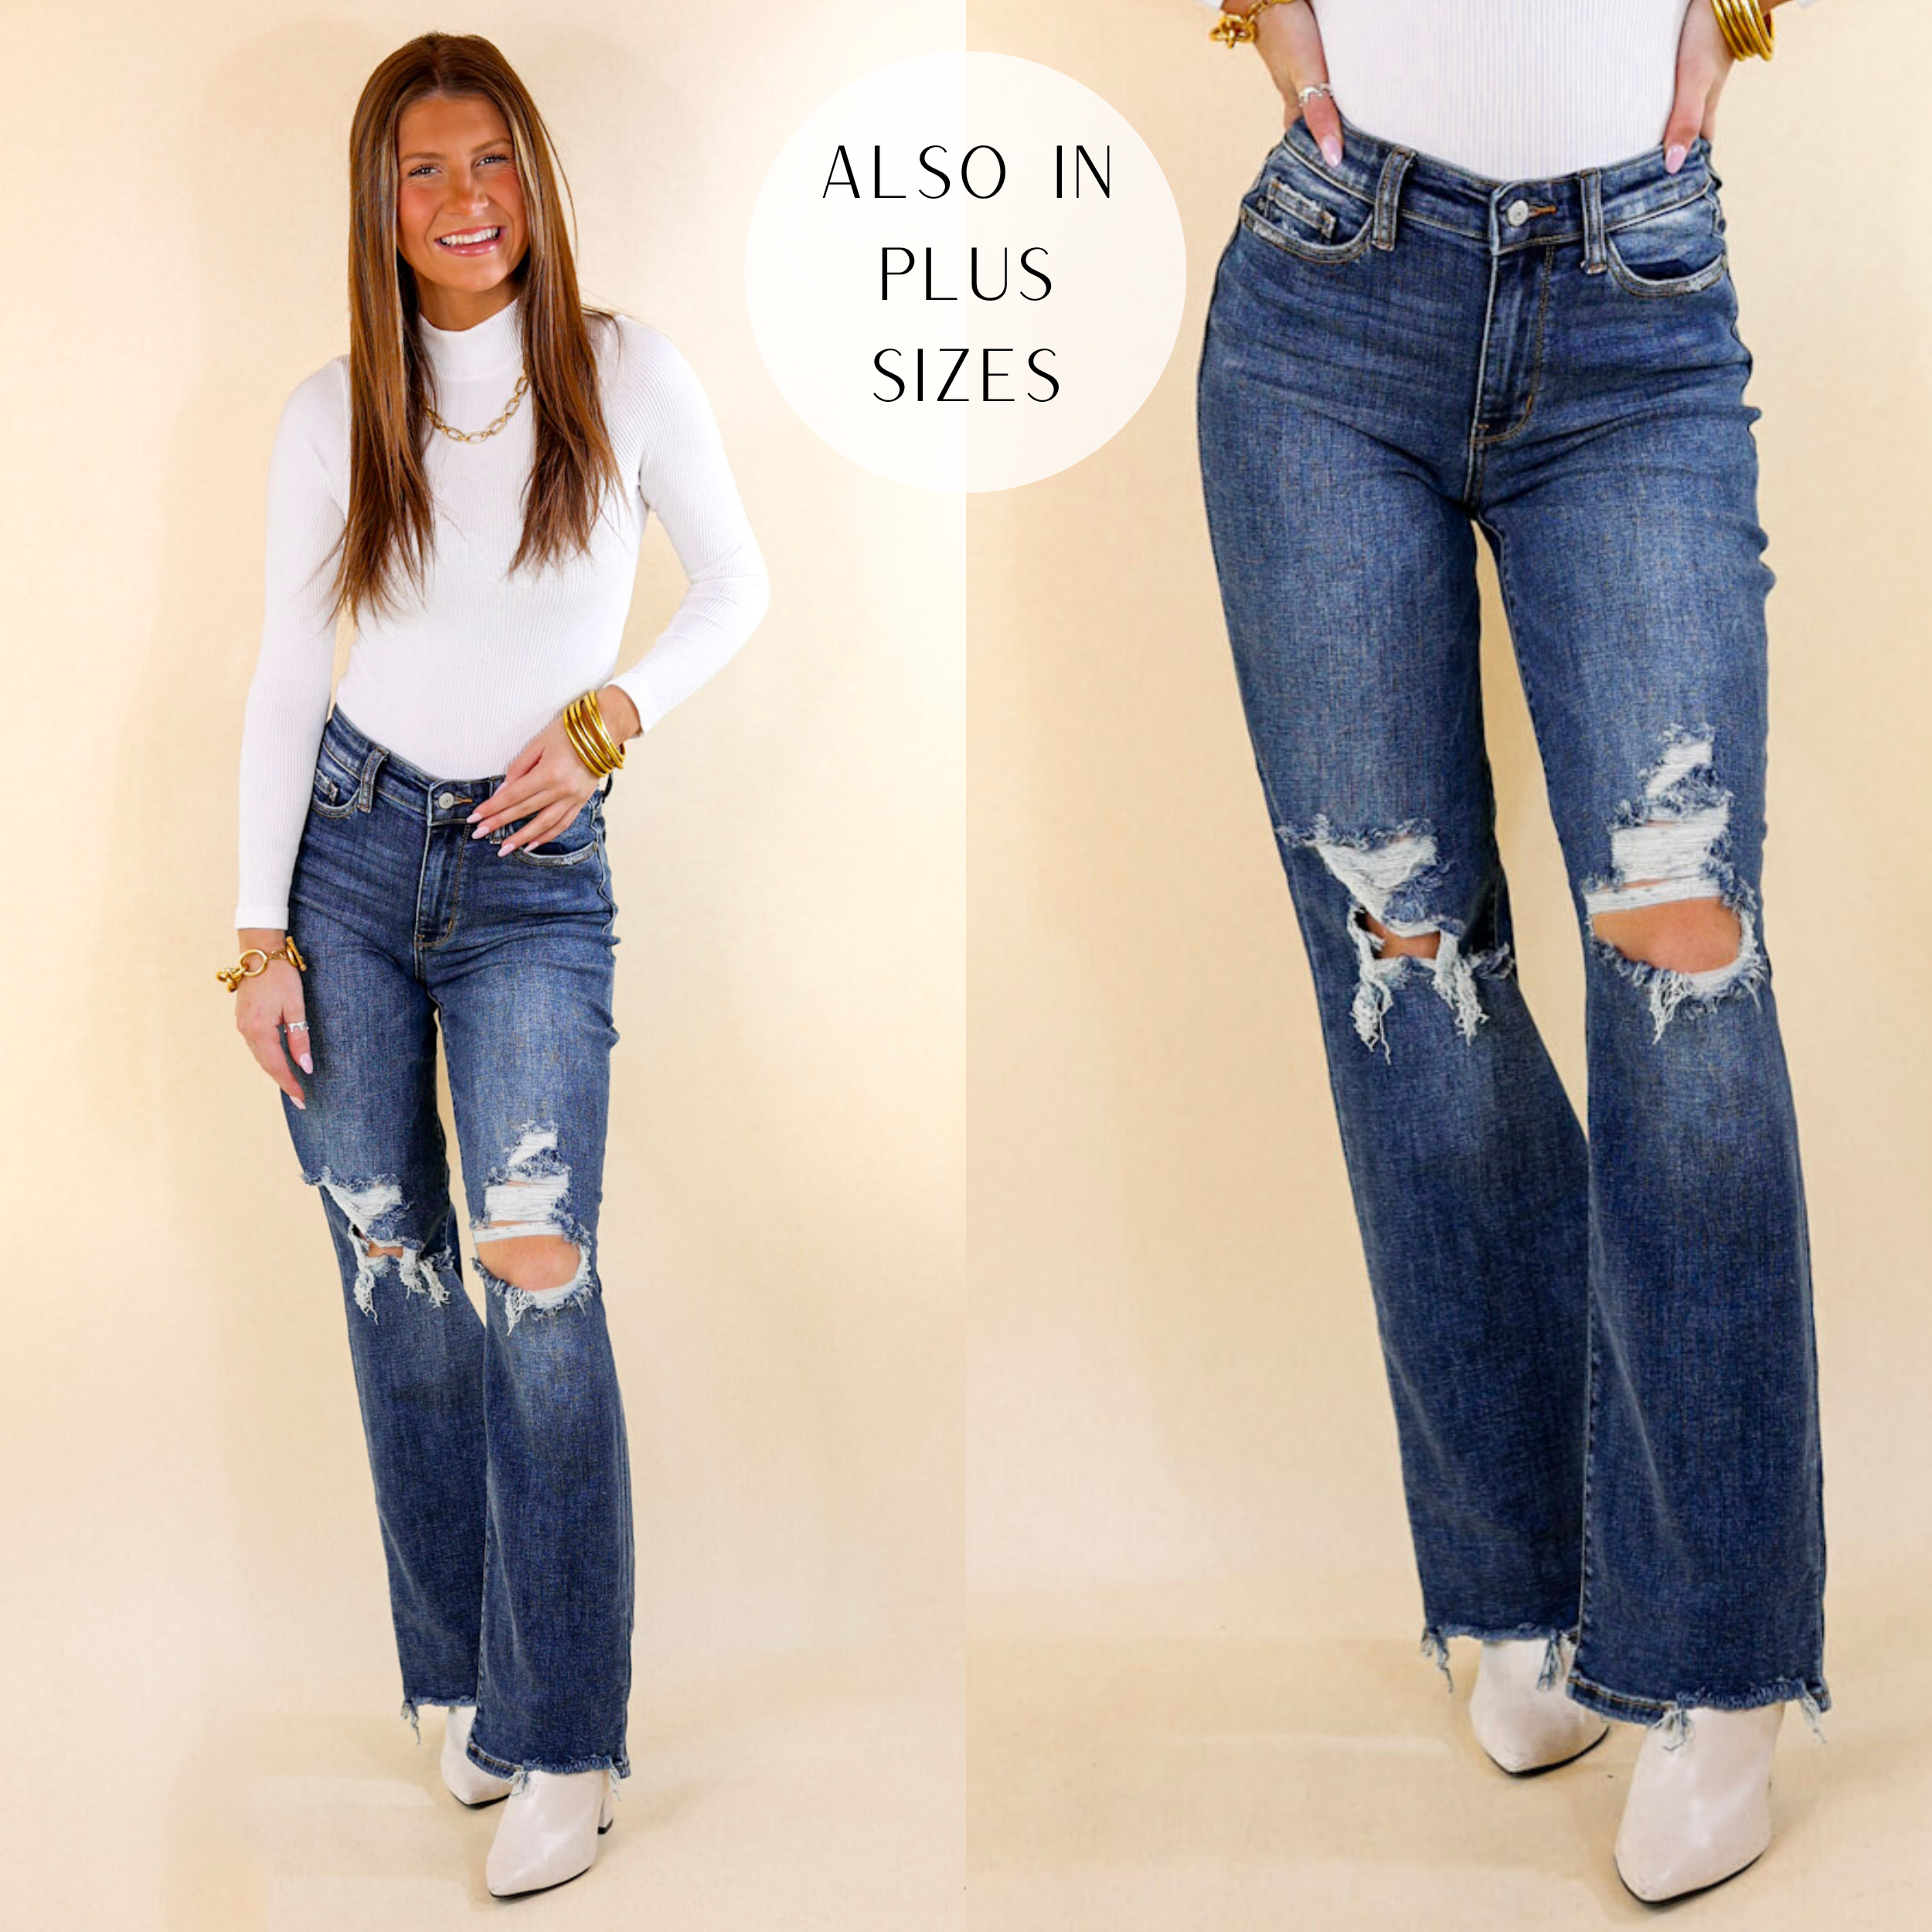 Model is wearing a pair of dark wash straight leg jeans with distressing on the knees. Model has it paired with a white long sleeve top, white booties, and gold jewelry.